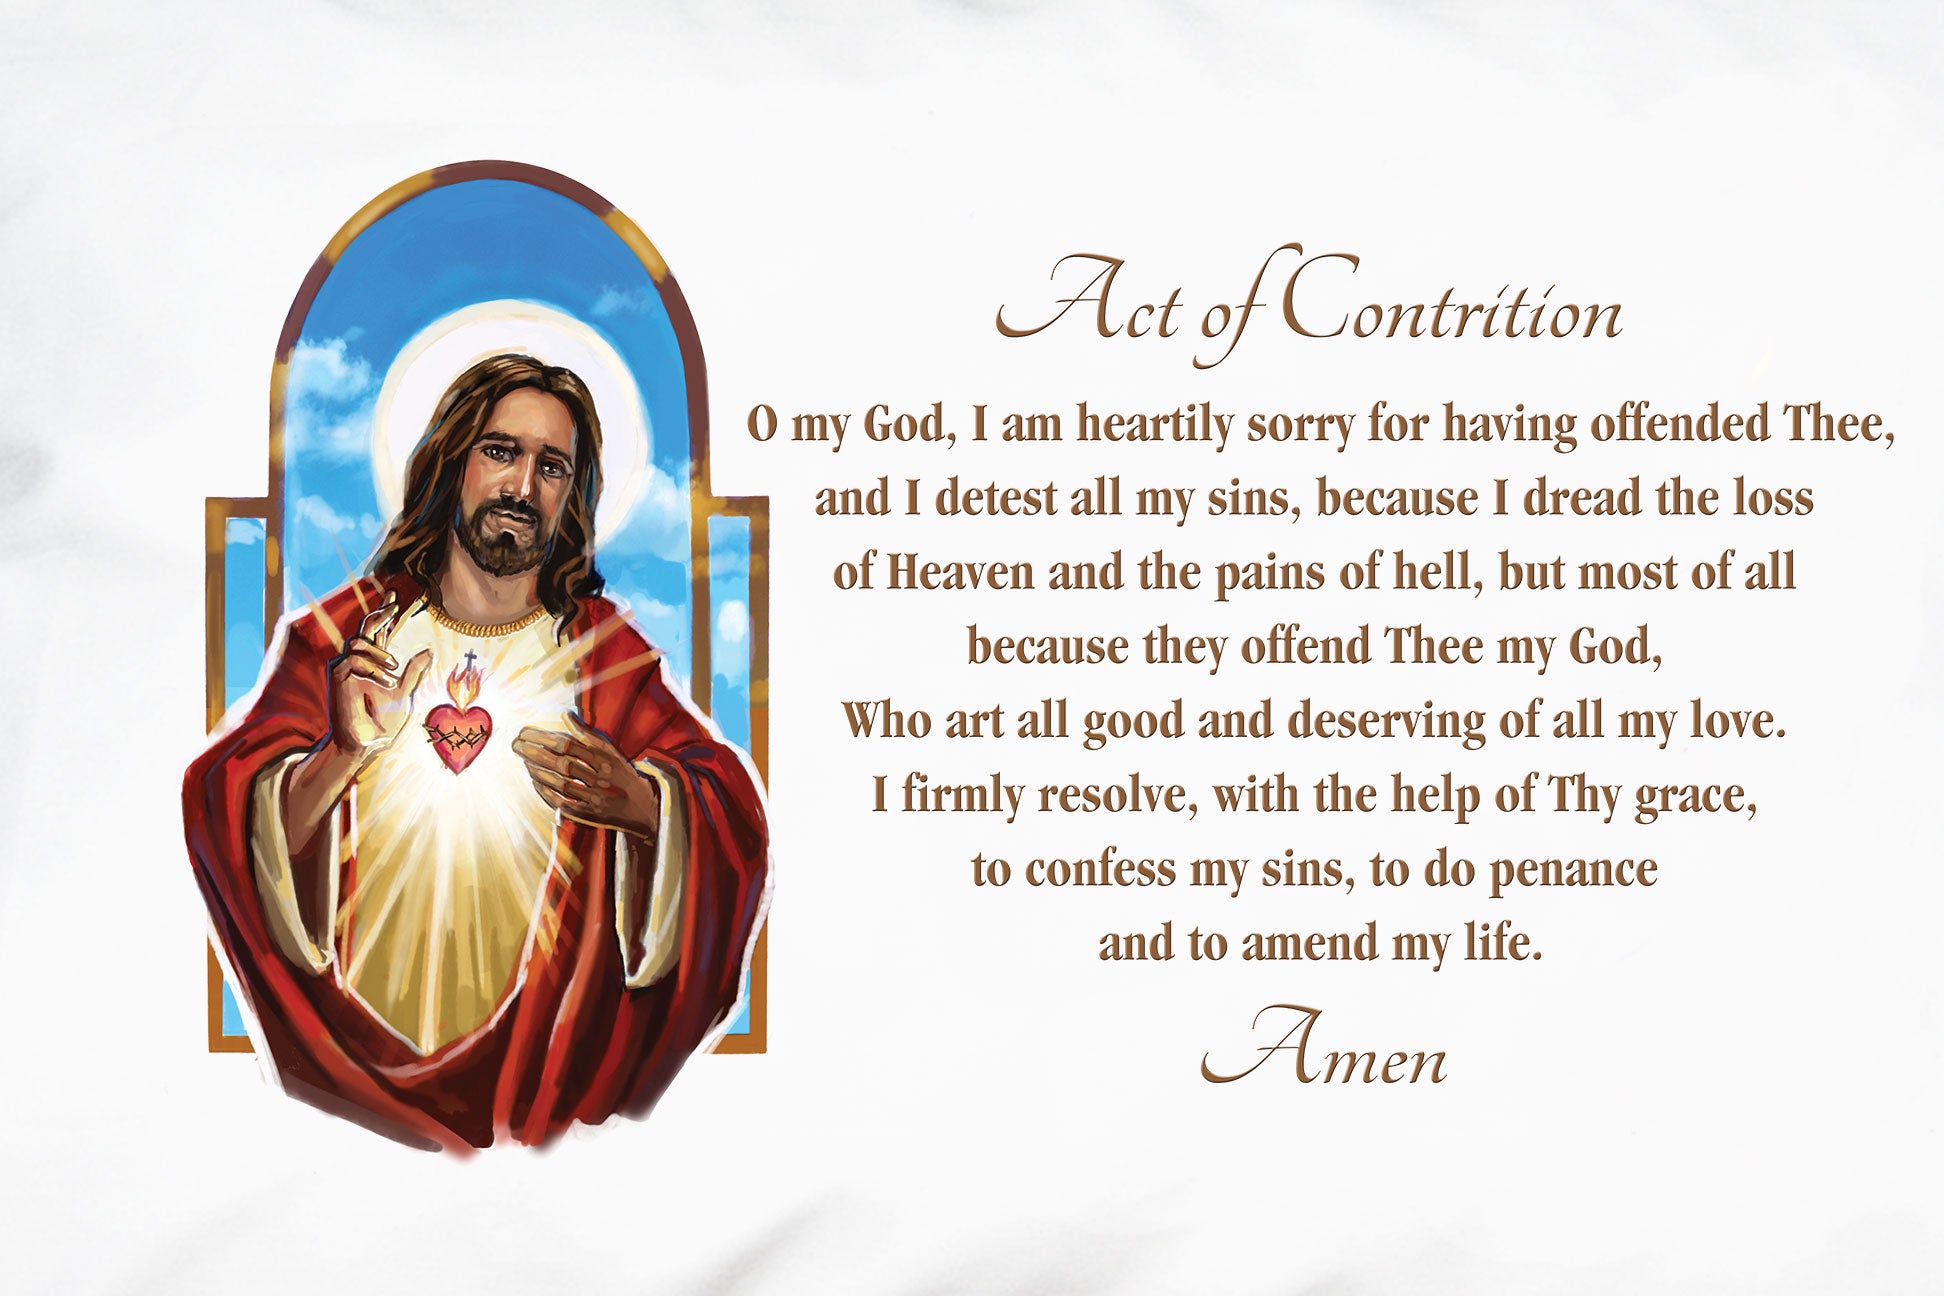 the act of contrition